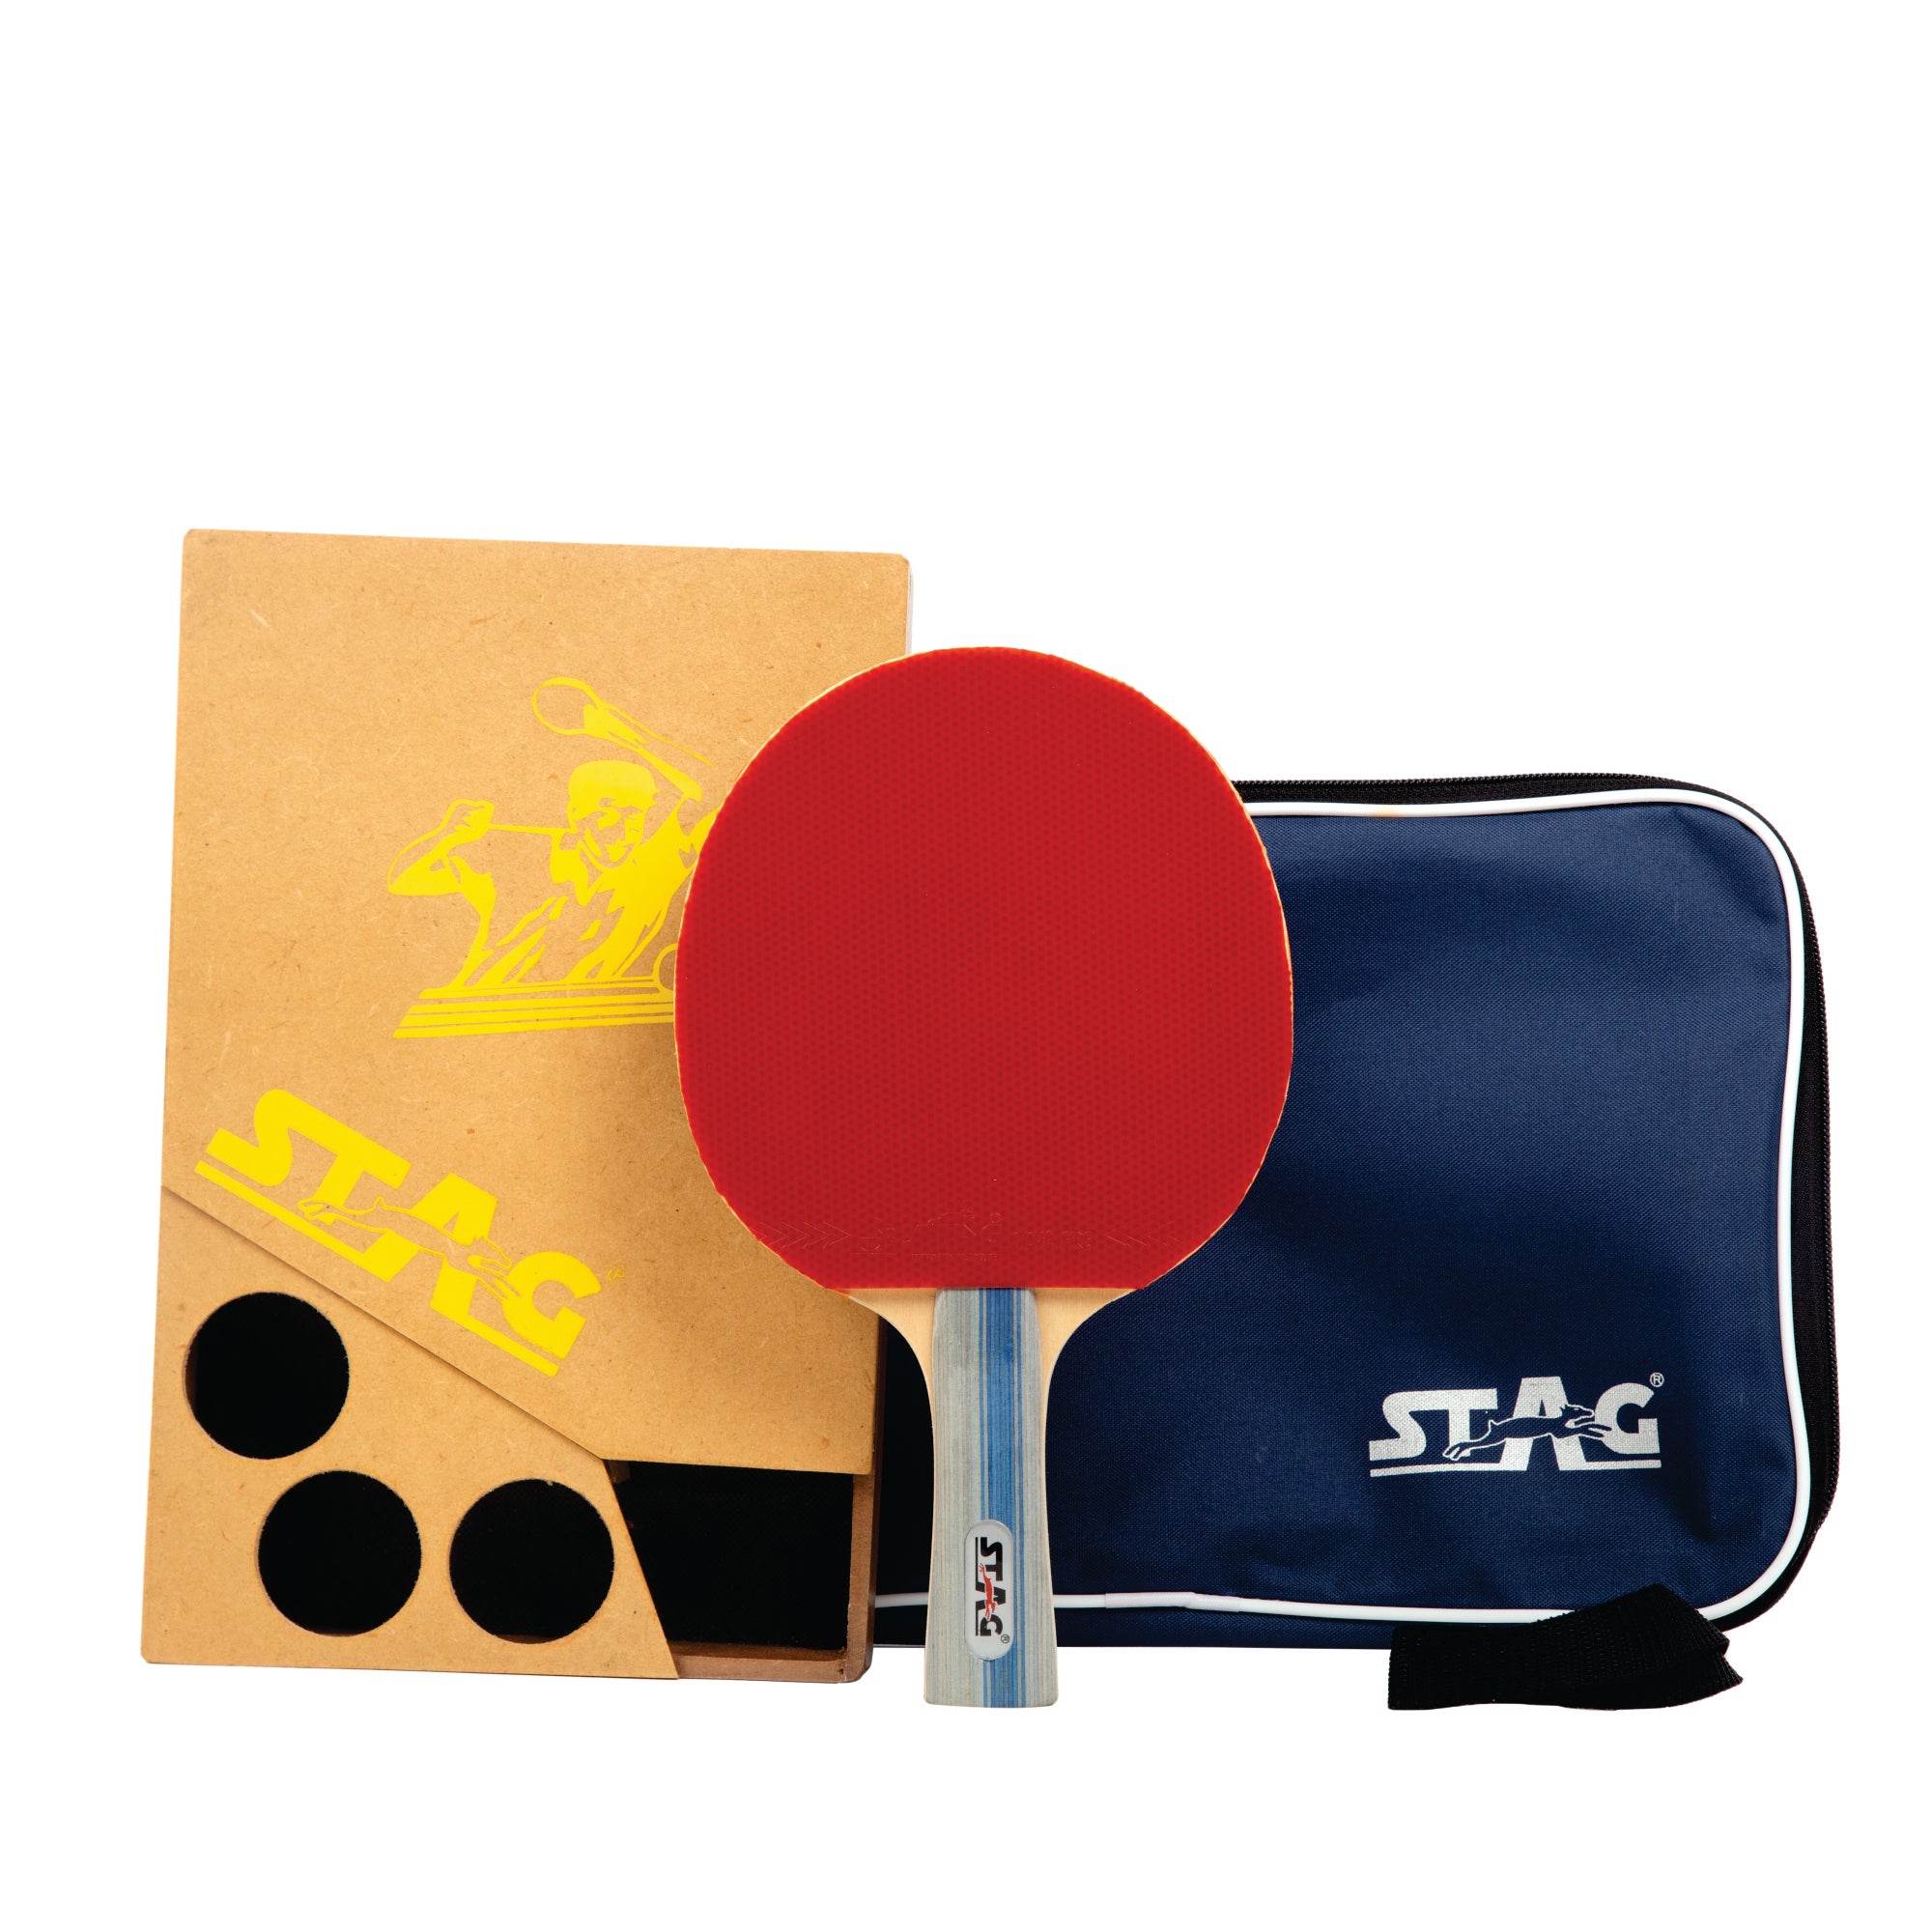 STAG Tec Ninja Table Tennis Racquet Advanced, ITTF Approved Rubber (Multicolor, 160 grams)